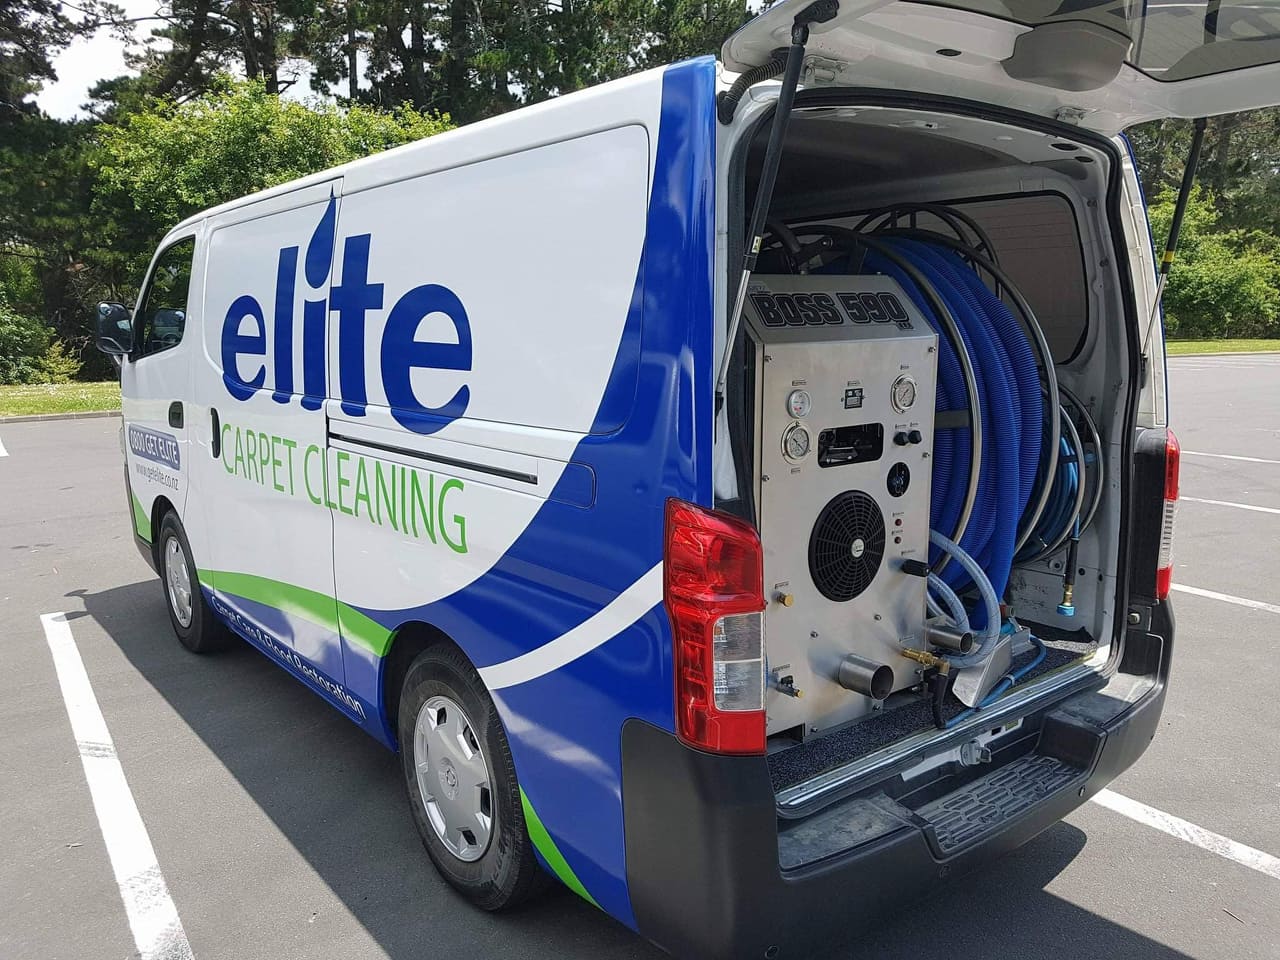 Quality Carpet Cleaning Equipment - Elite Carpet Cleaning Vans carry Van-Mounted Machines